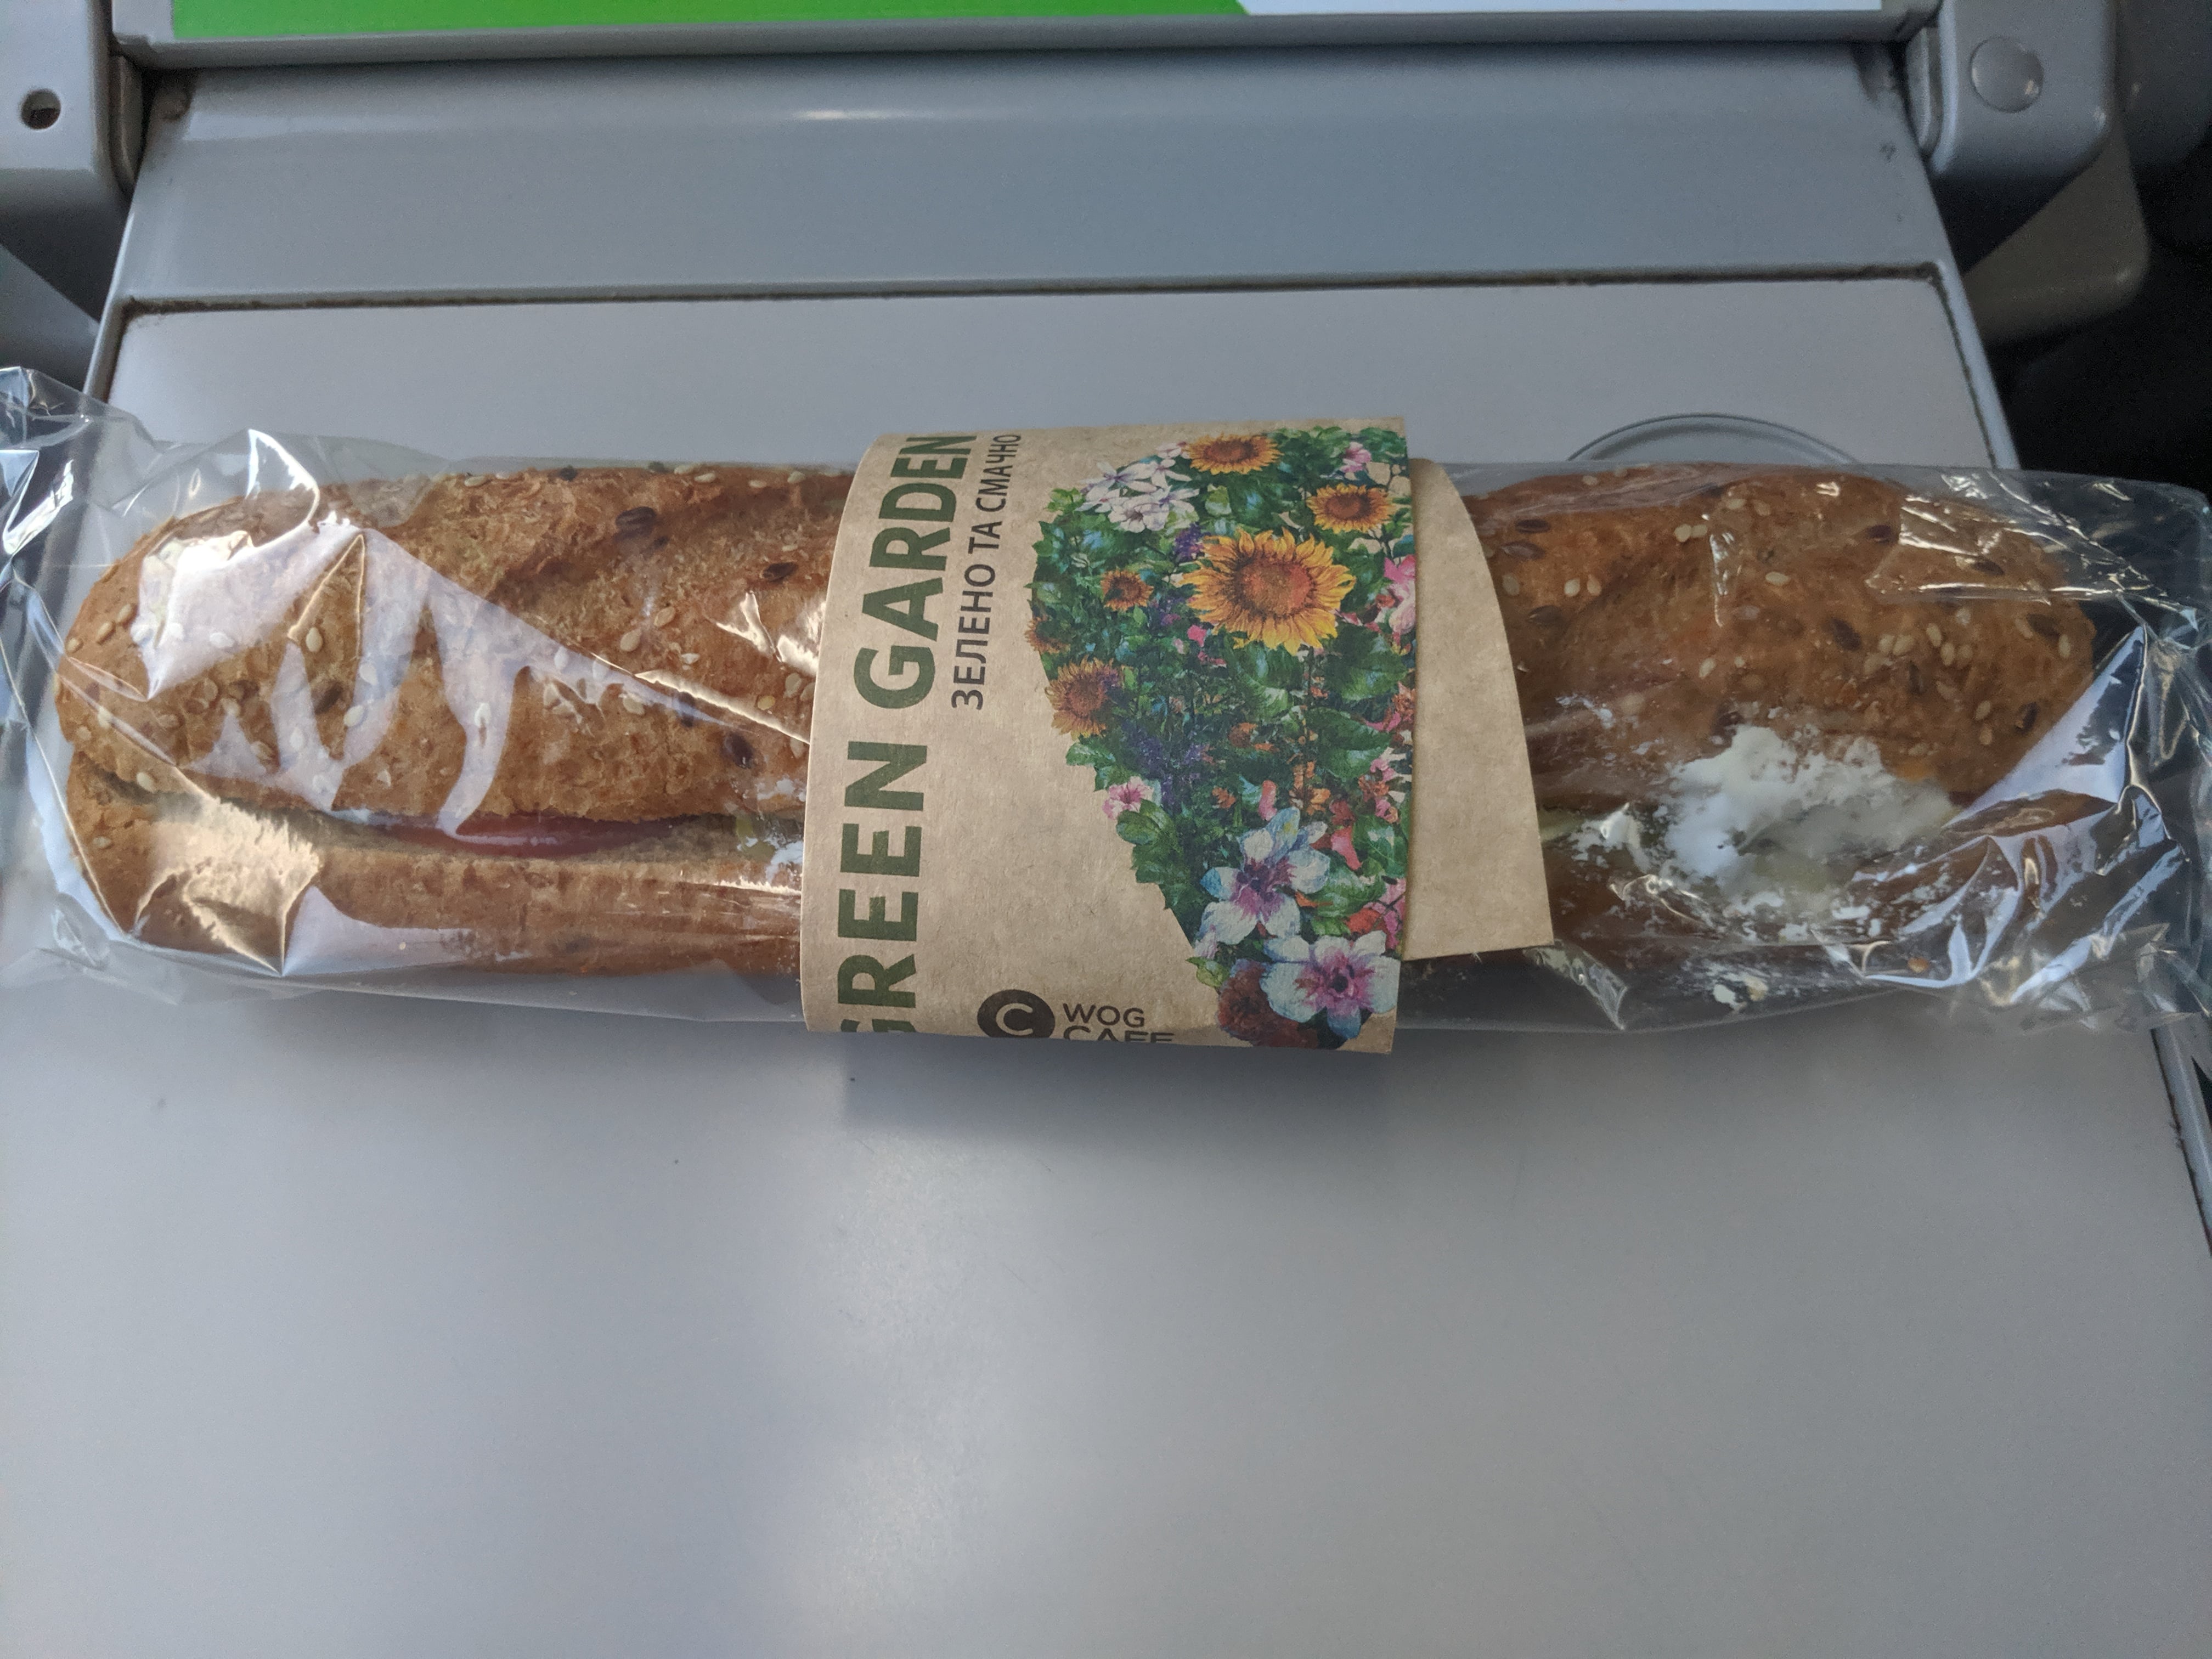 vegetarian sandwich with feta cheese and green in Ukrainian trains